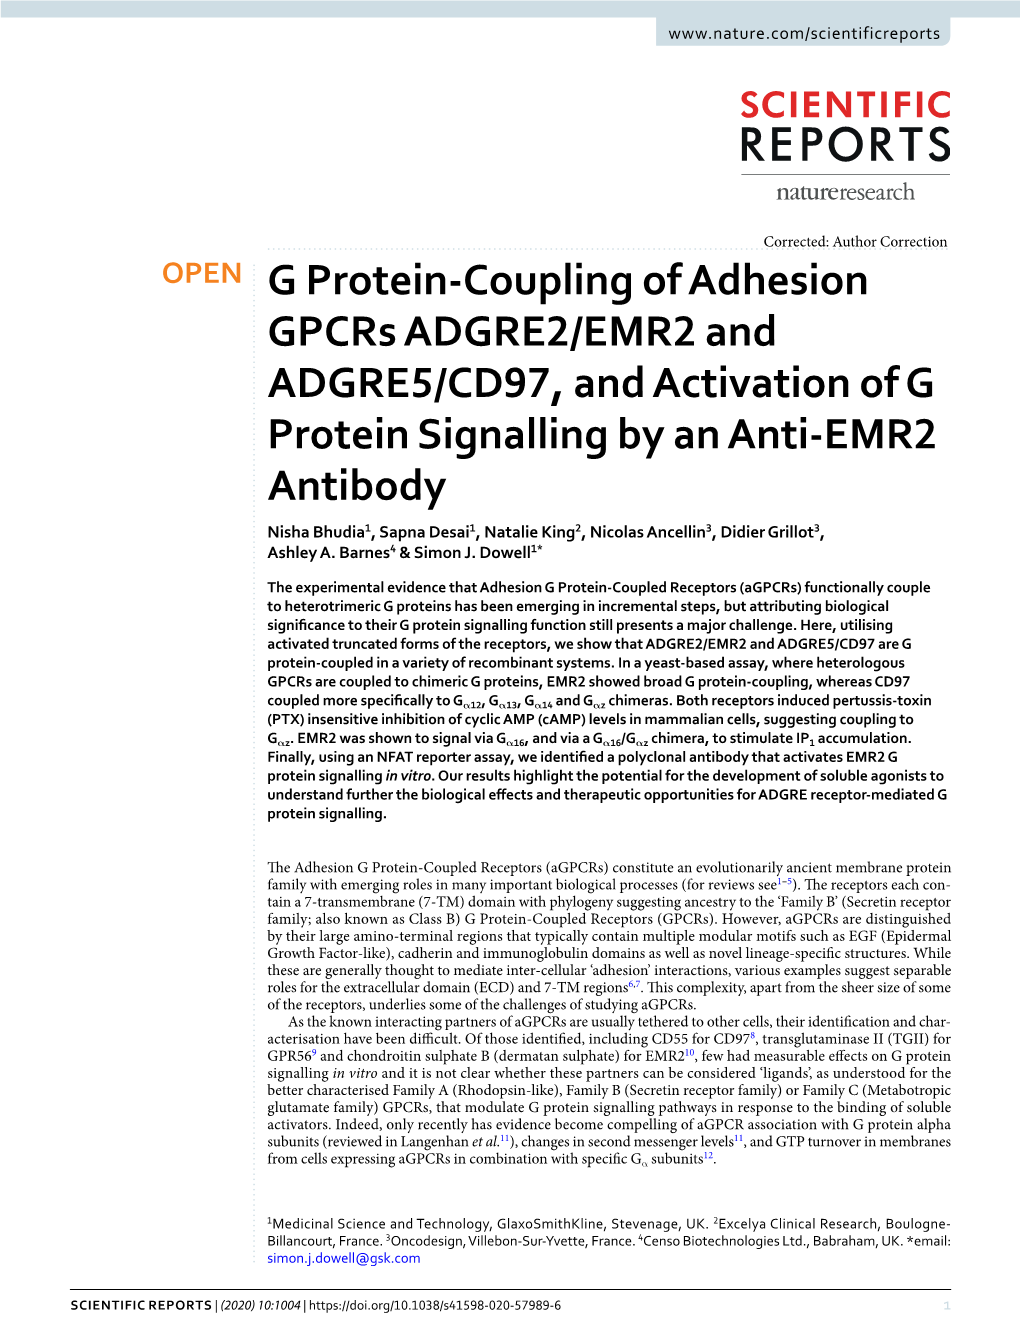 G Protein-Coupling of Adhesion Gpcrs ADGRE2/EMR2